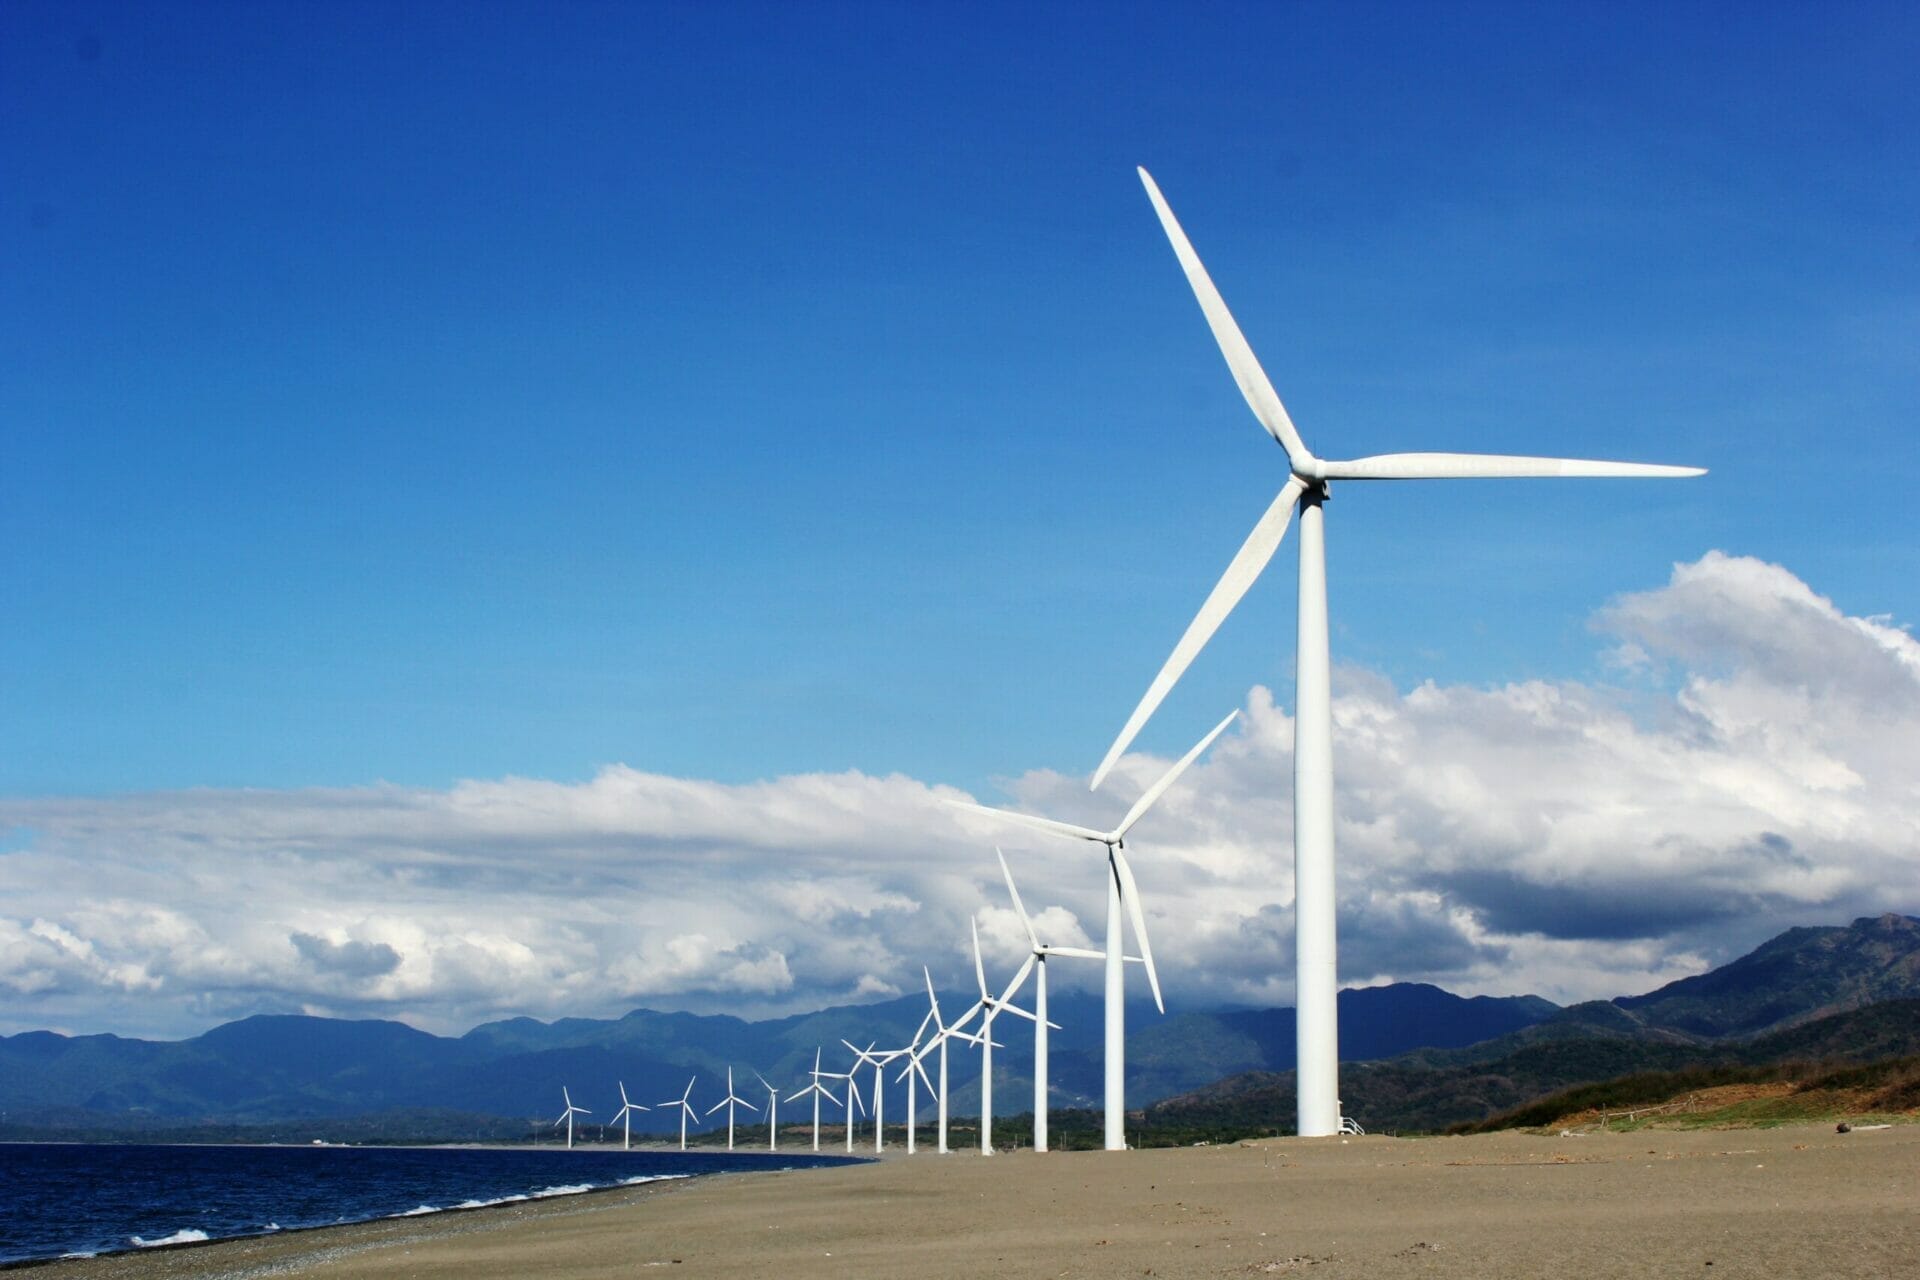 Landscape with long row of wind turbines stretching towards the horizon